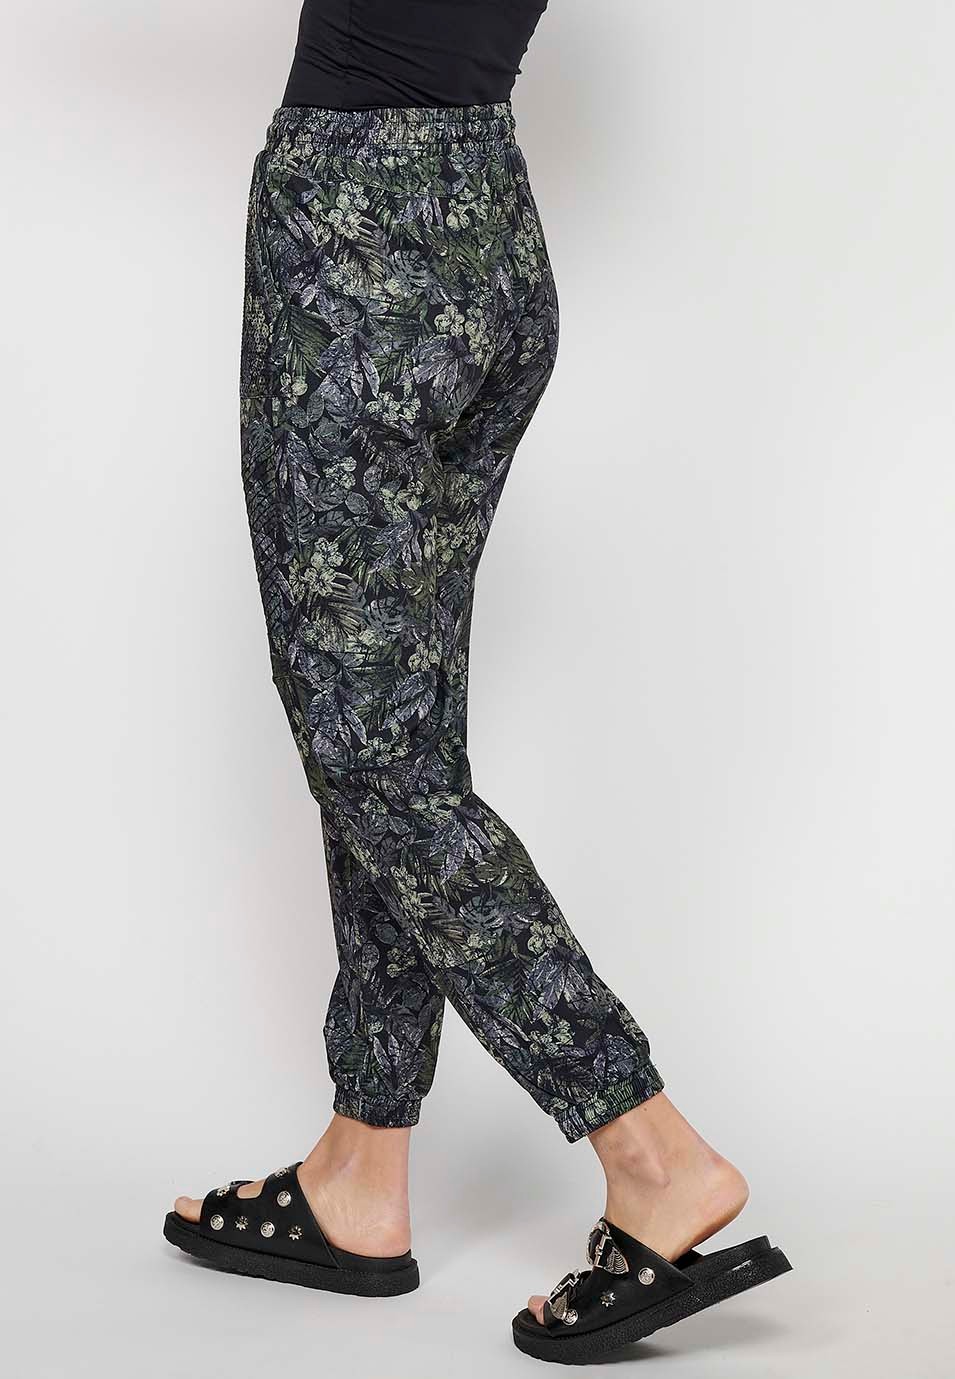 Long jogging pants fitted at the ankles with elasticated waistband with drawstring and Khaki floral print for Women 7